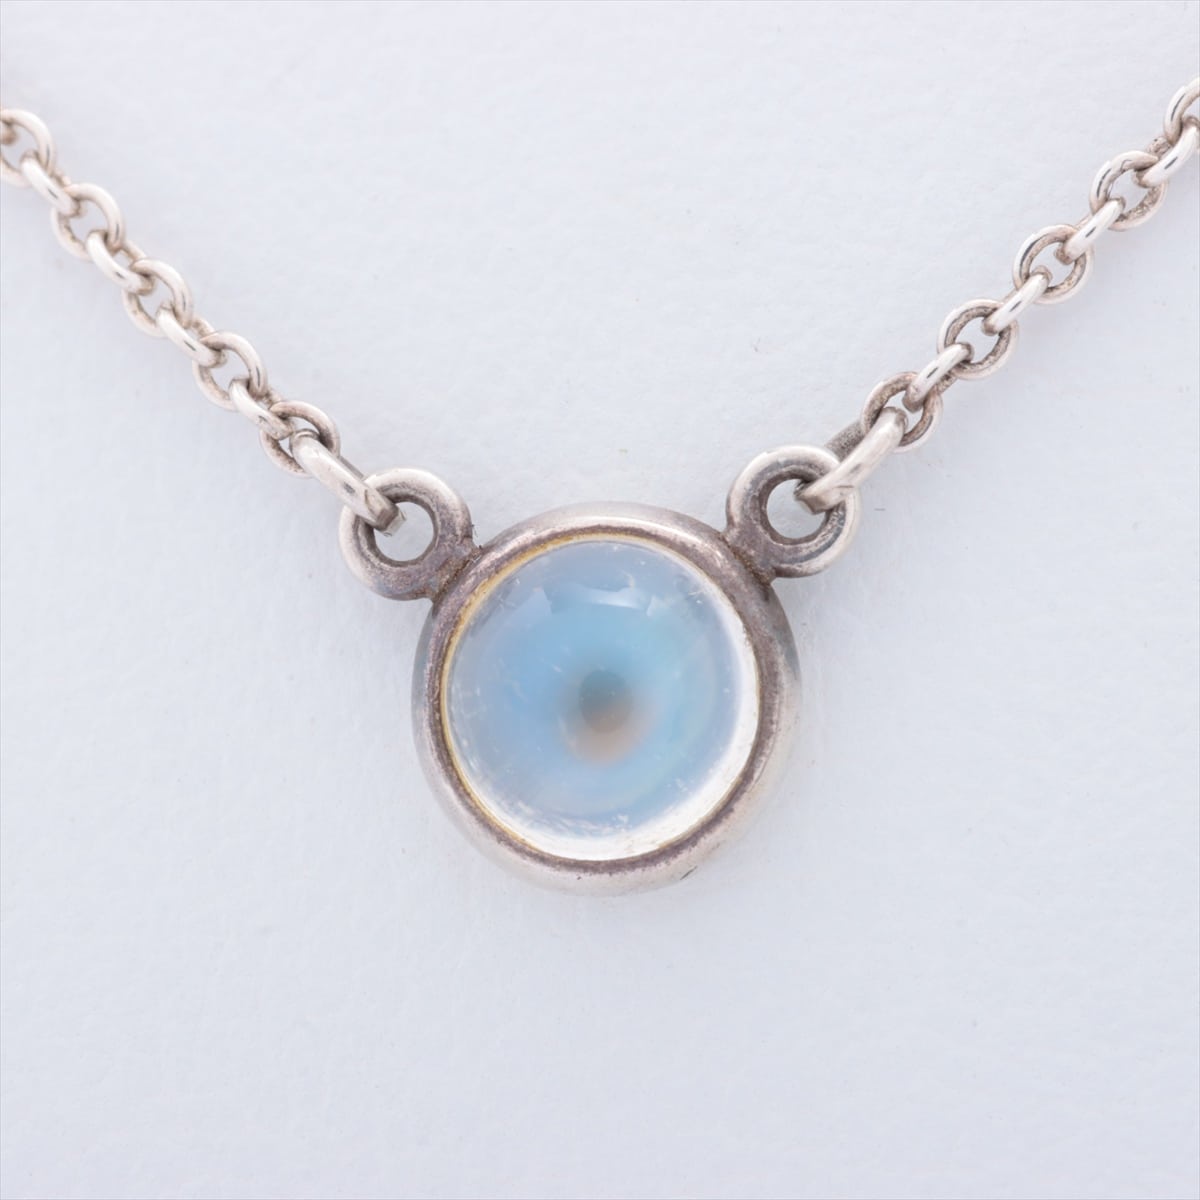 Tiffany Kolor By the Yard Necklace 925 1.8g Silver Moonstone